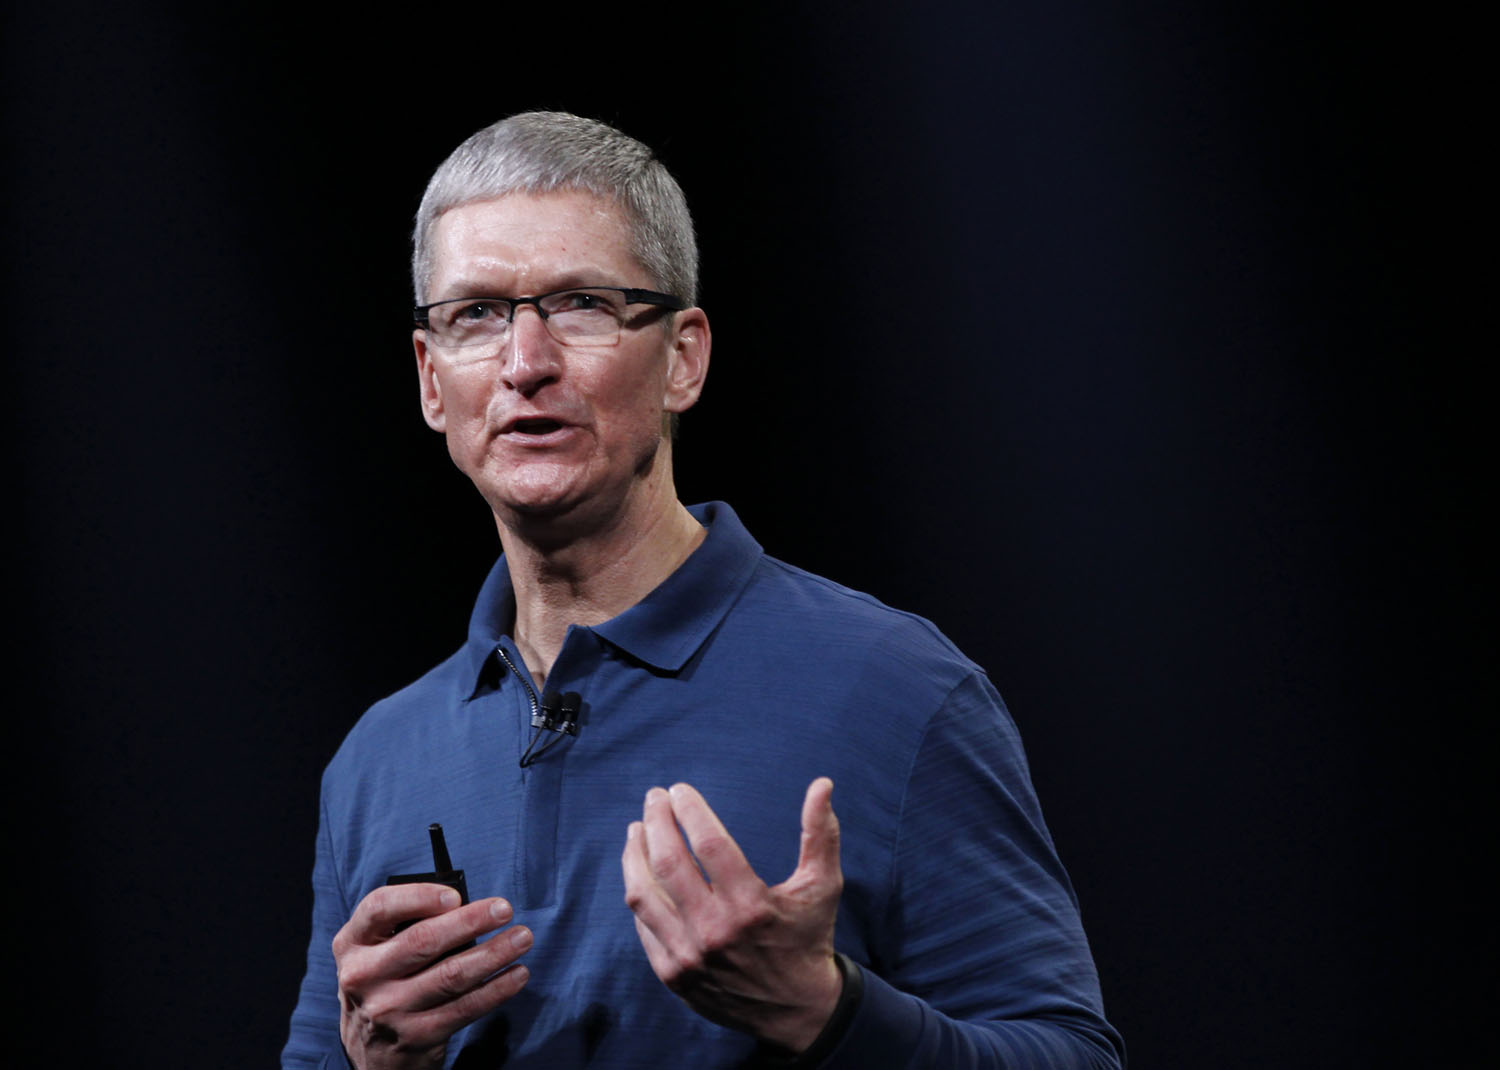 Apple CEO Tim Cook speaks to the audience during an Apple event in San Jose, Calif., on Oct. 23, 2012. (Robert Galbraith—Reuters)